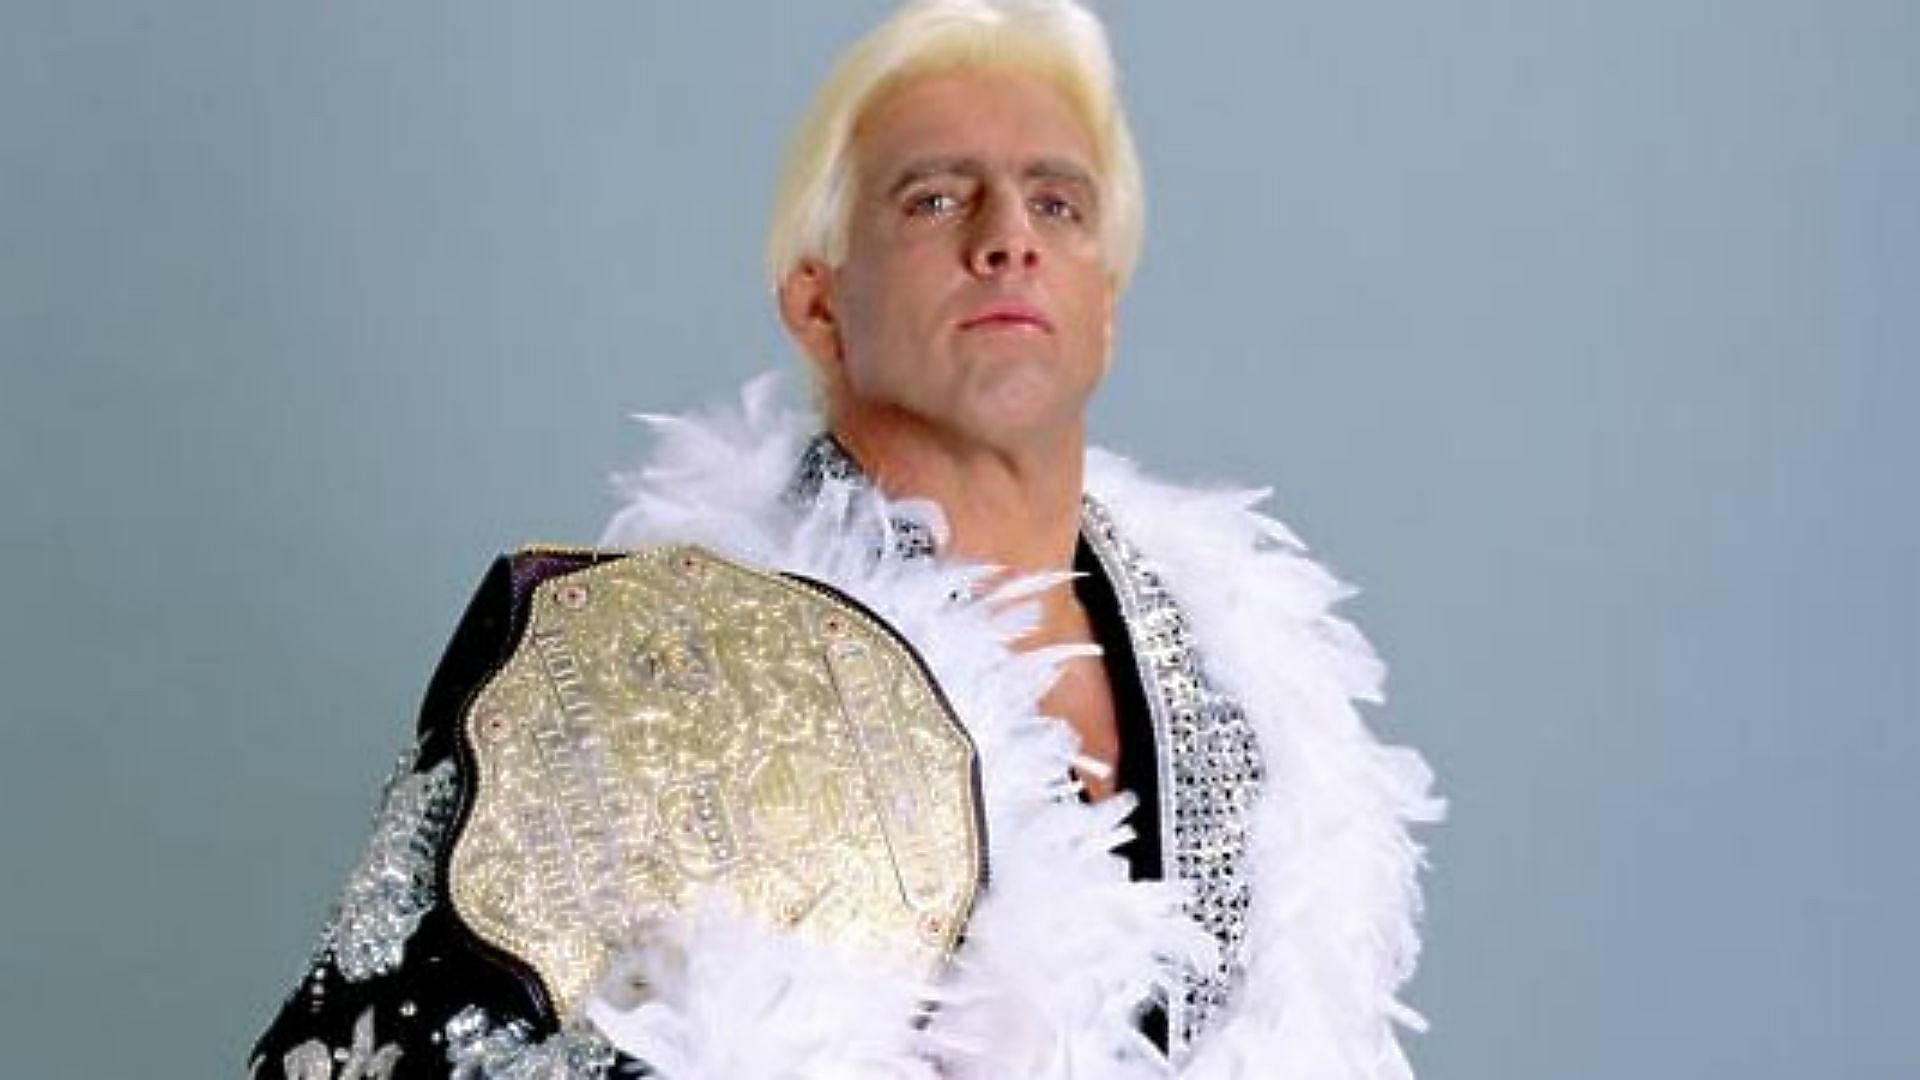 Another member of the Flair family may help Ric out